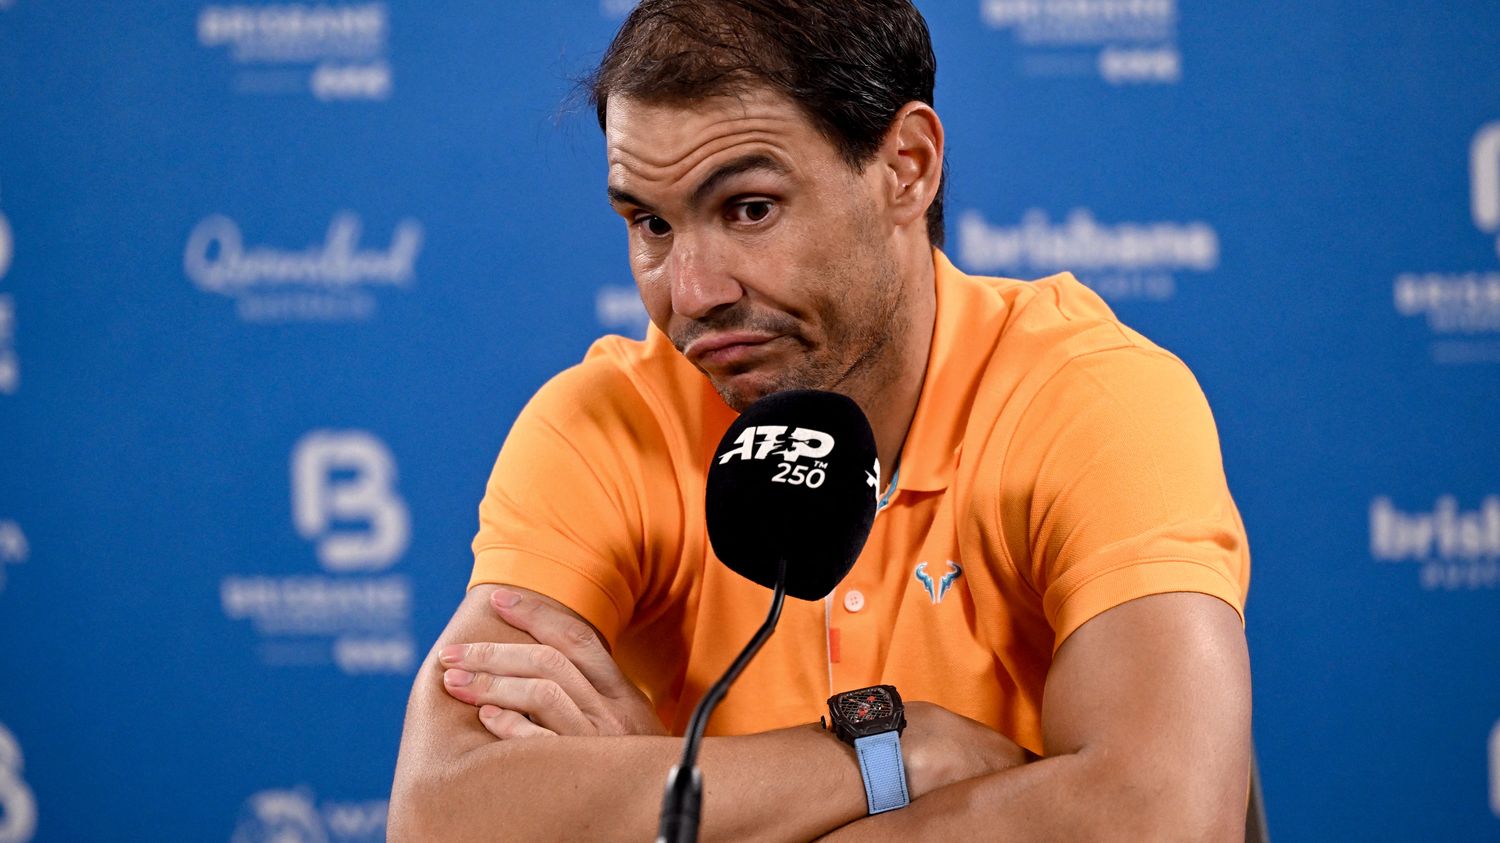 Tennis: We recap the controversy targeting Rafael Nadal following his comments on feminism